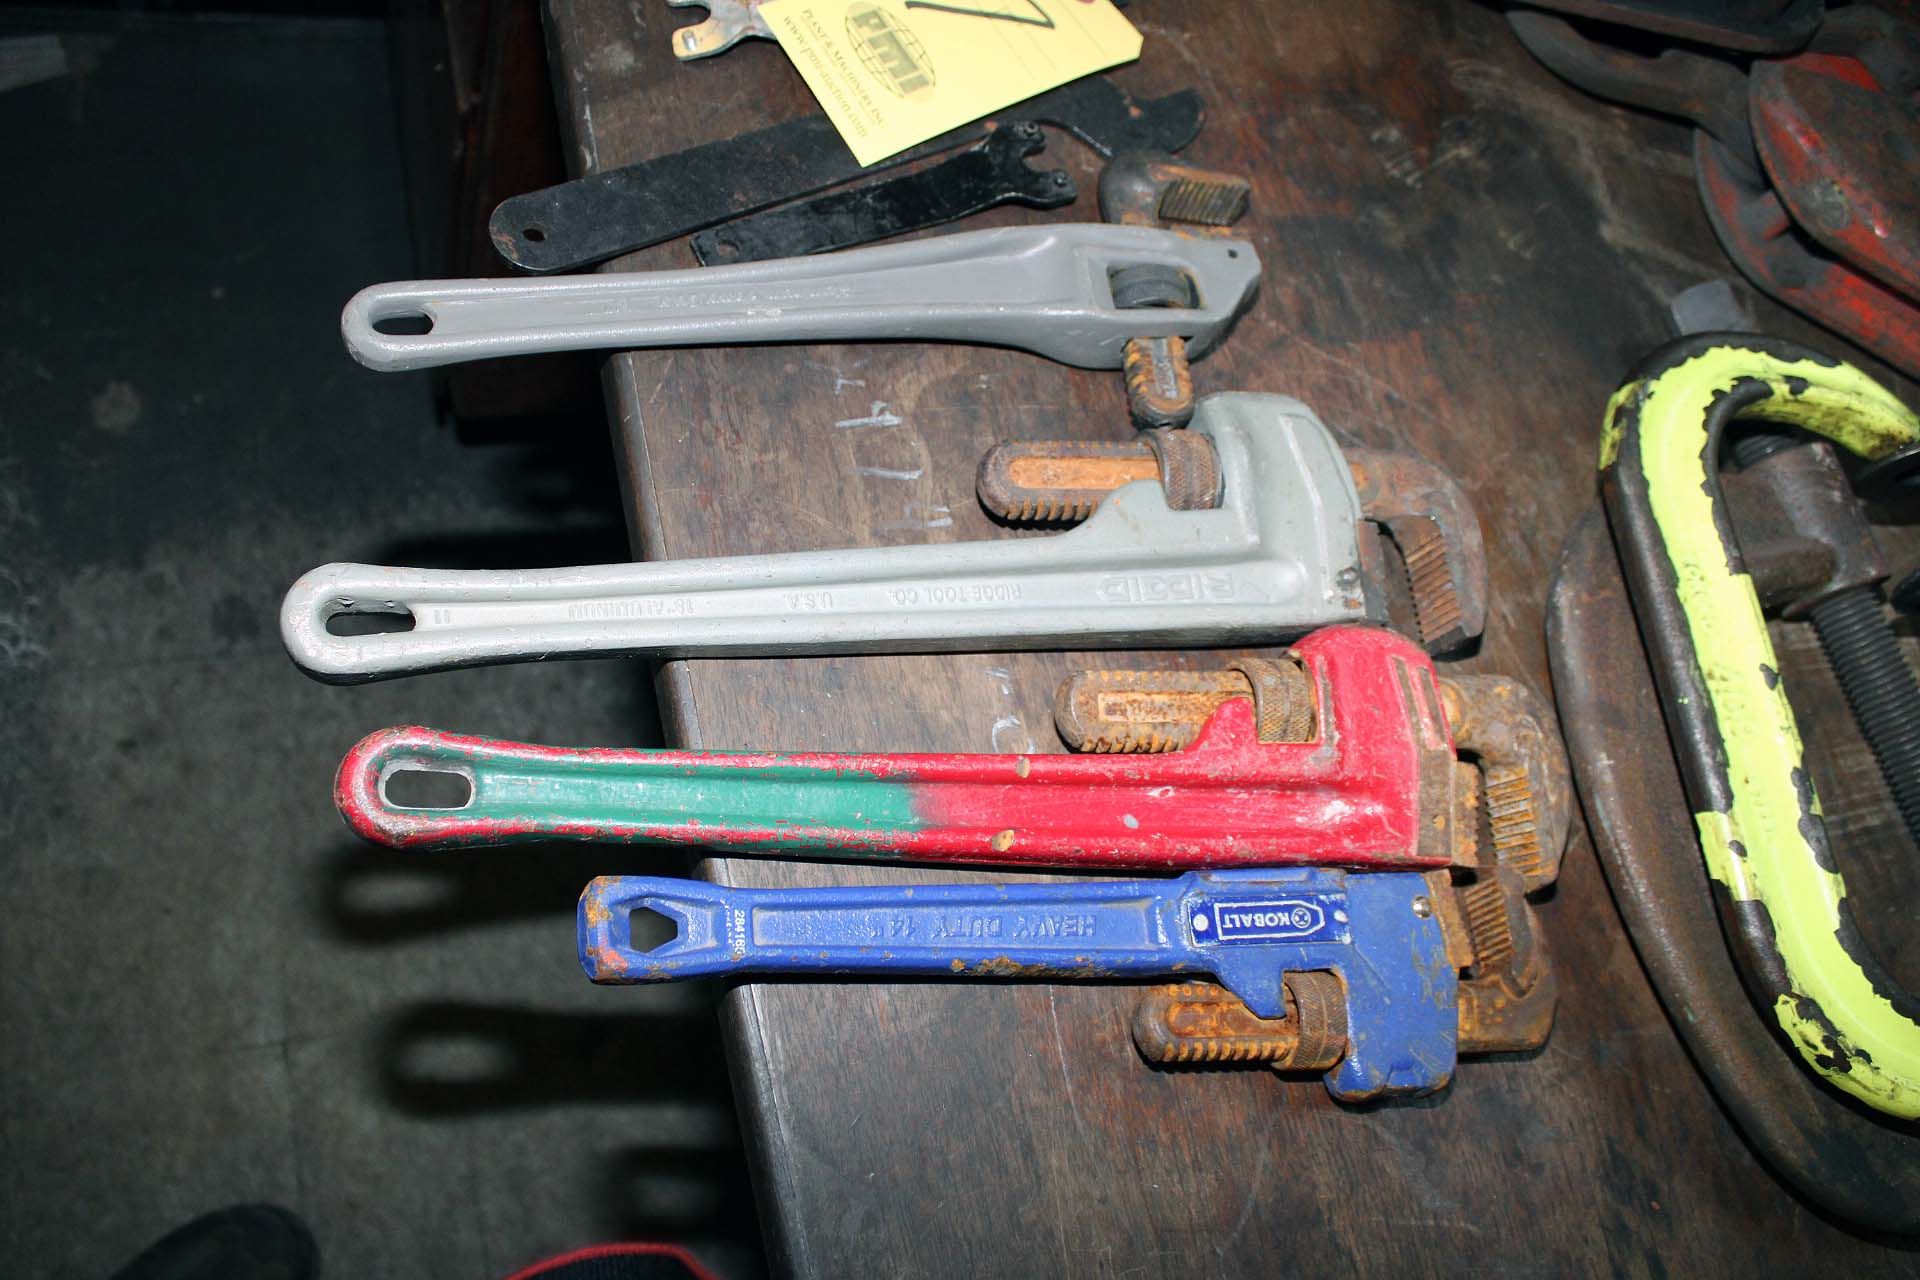 LOT CONSISTING OF: (4) pipe wrenches, (2) C-clamps, (1) chisel scaler w/chisels, hammers, wrenches & - Bild 3 aus 4